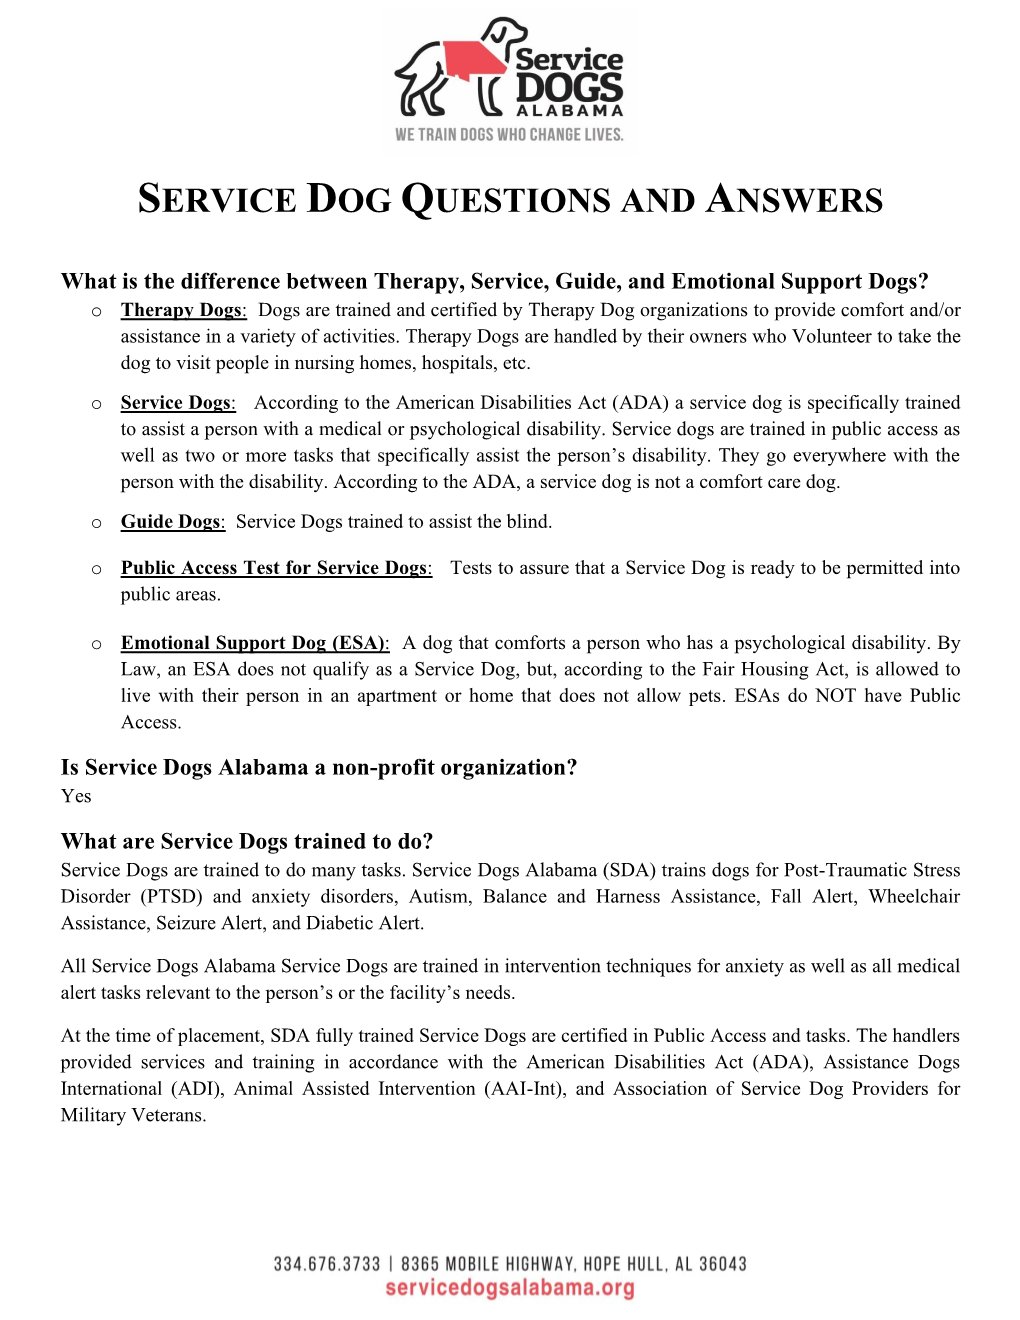 Service Dog Questions and Answers